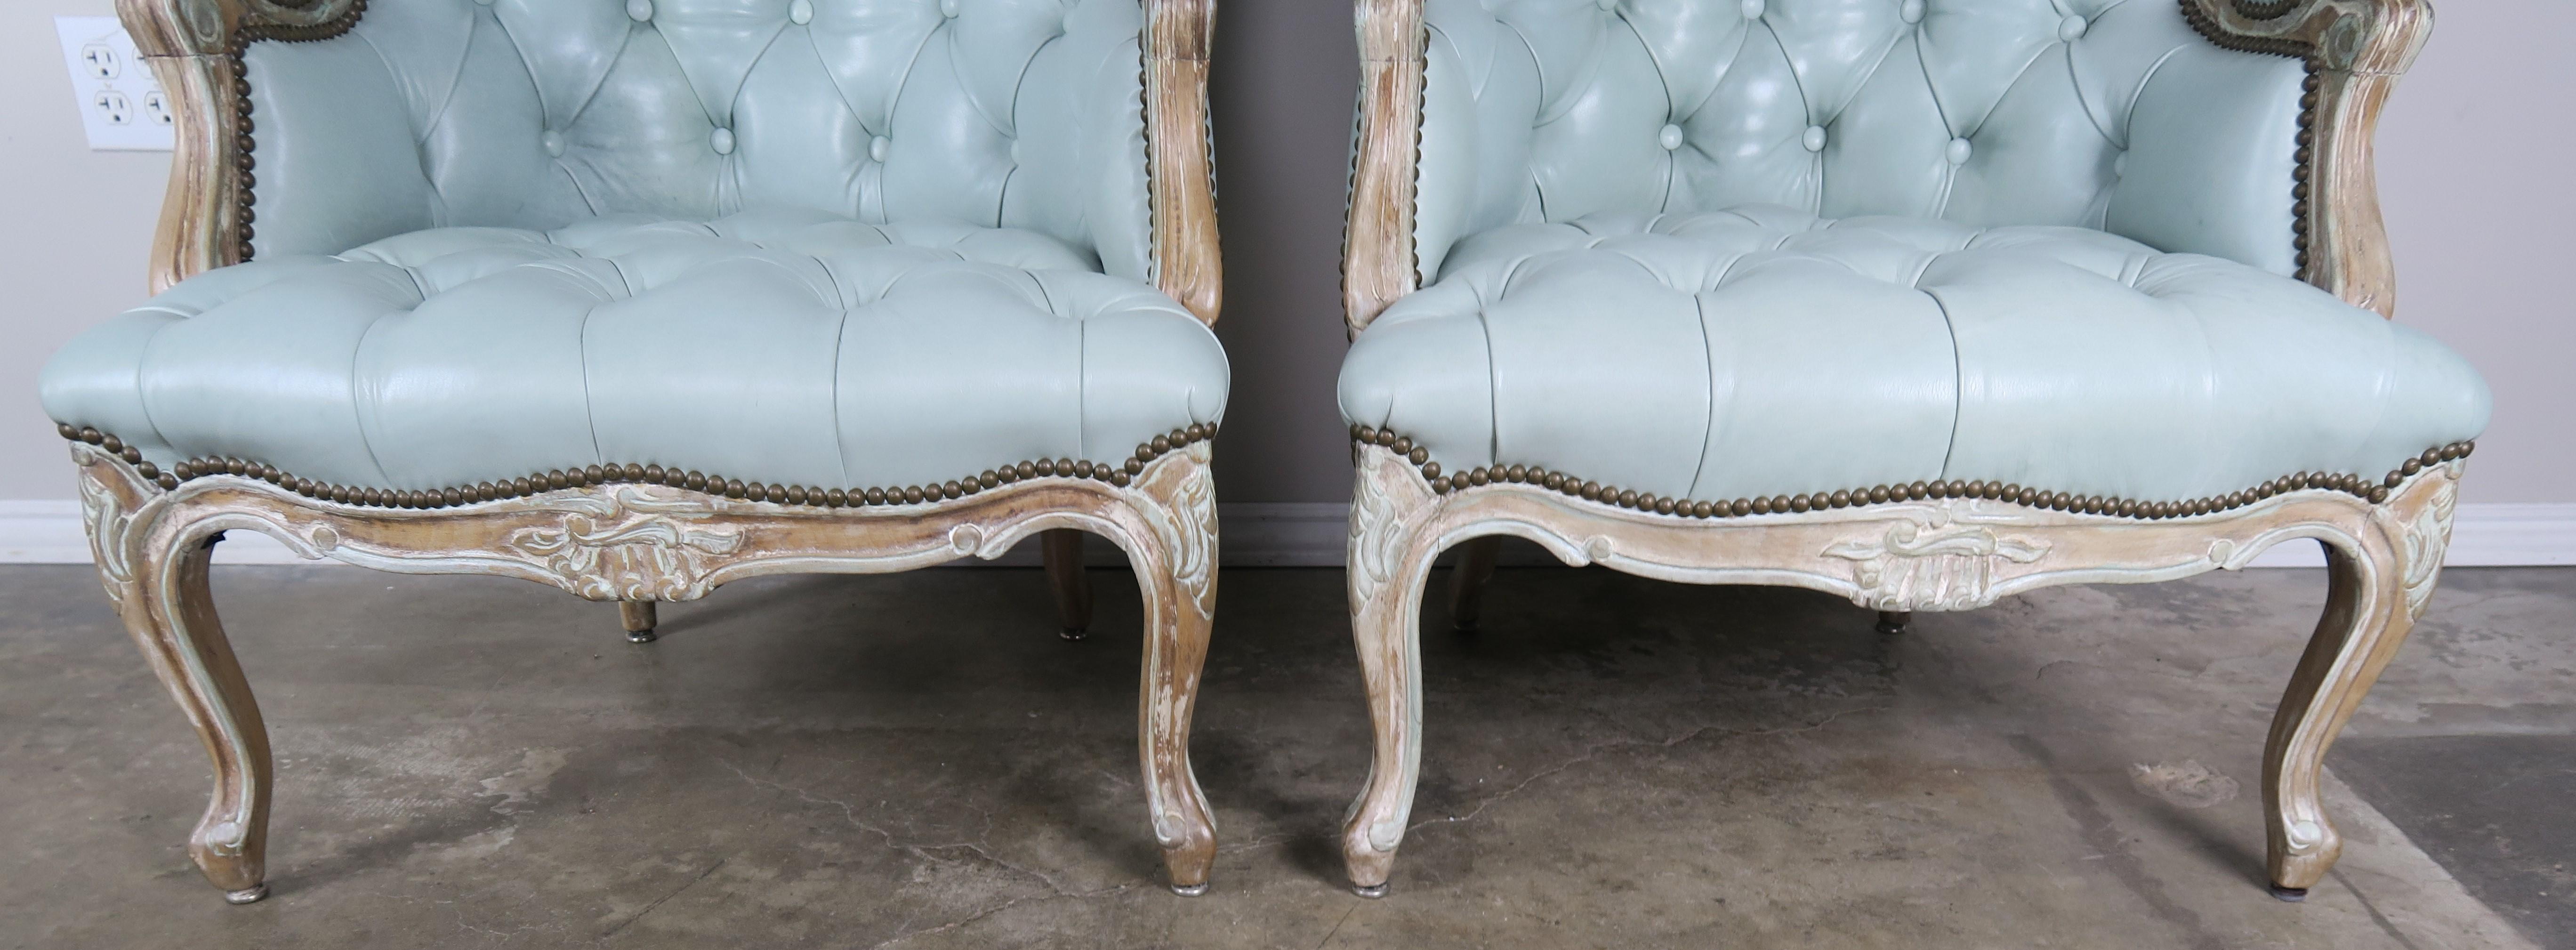 Pair of 19th century French painted Louis XV style bergere armchairs upholstered in a soft blue colored tufted leather with brass nailhead trim detail. The armchairs stand on four cabriole legs with rams head feet. Beautiful distressed painted